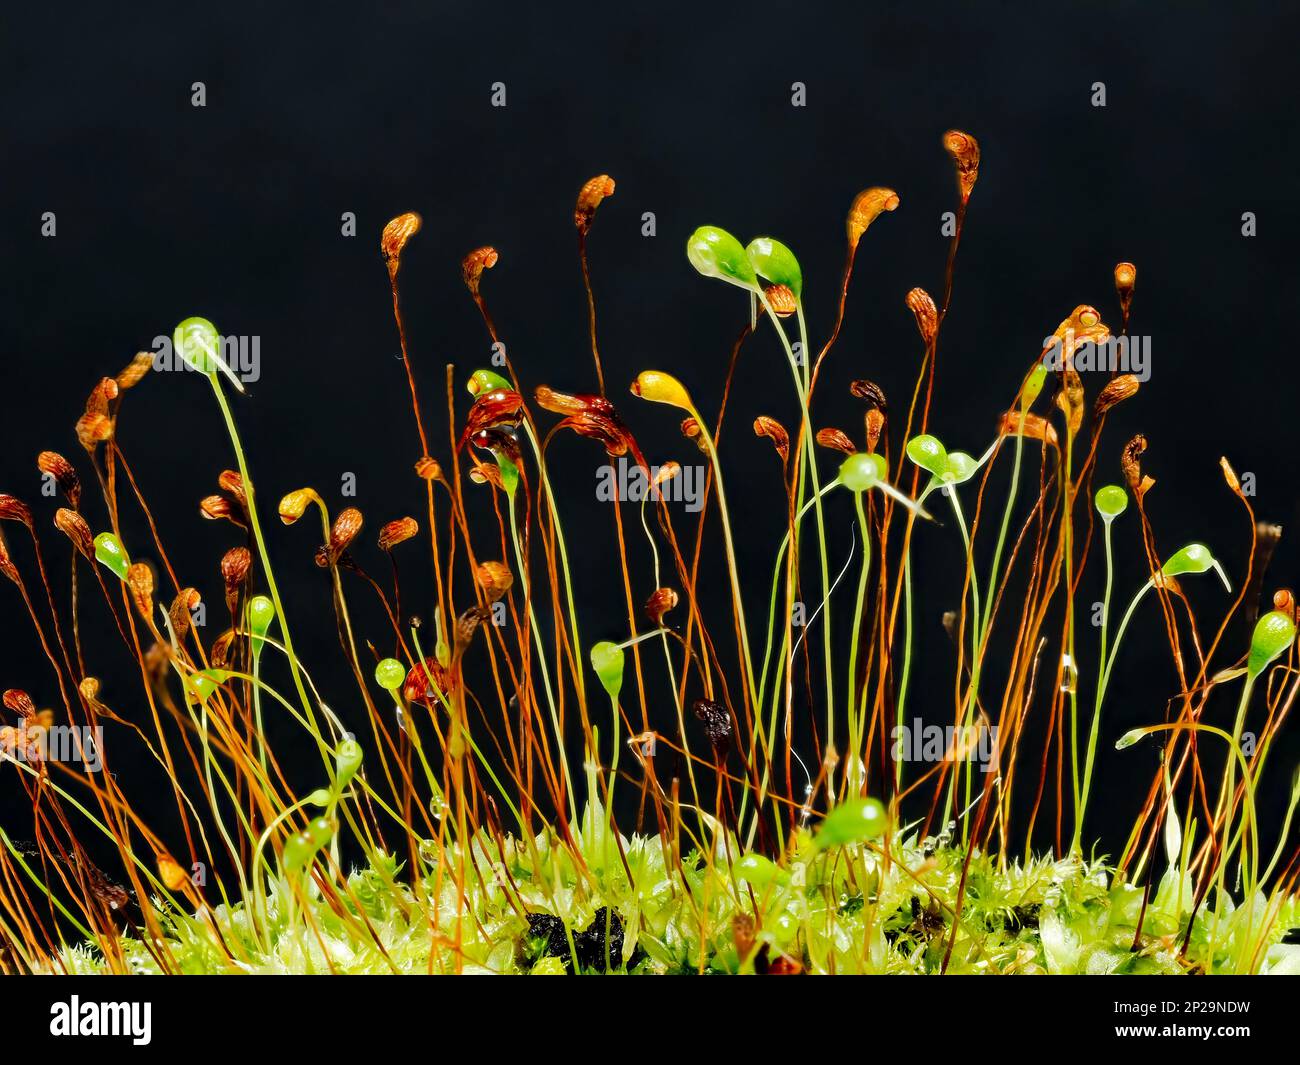 Seed heads of a moss plant photographed against a black background Stock Photo